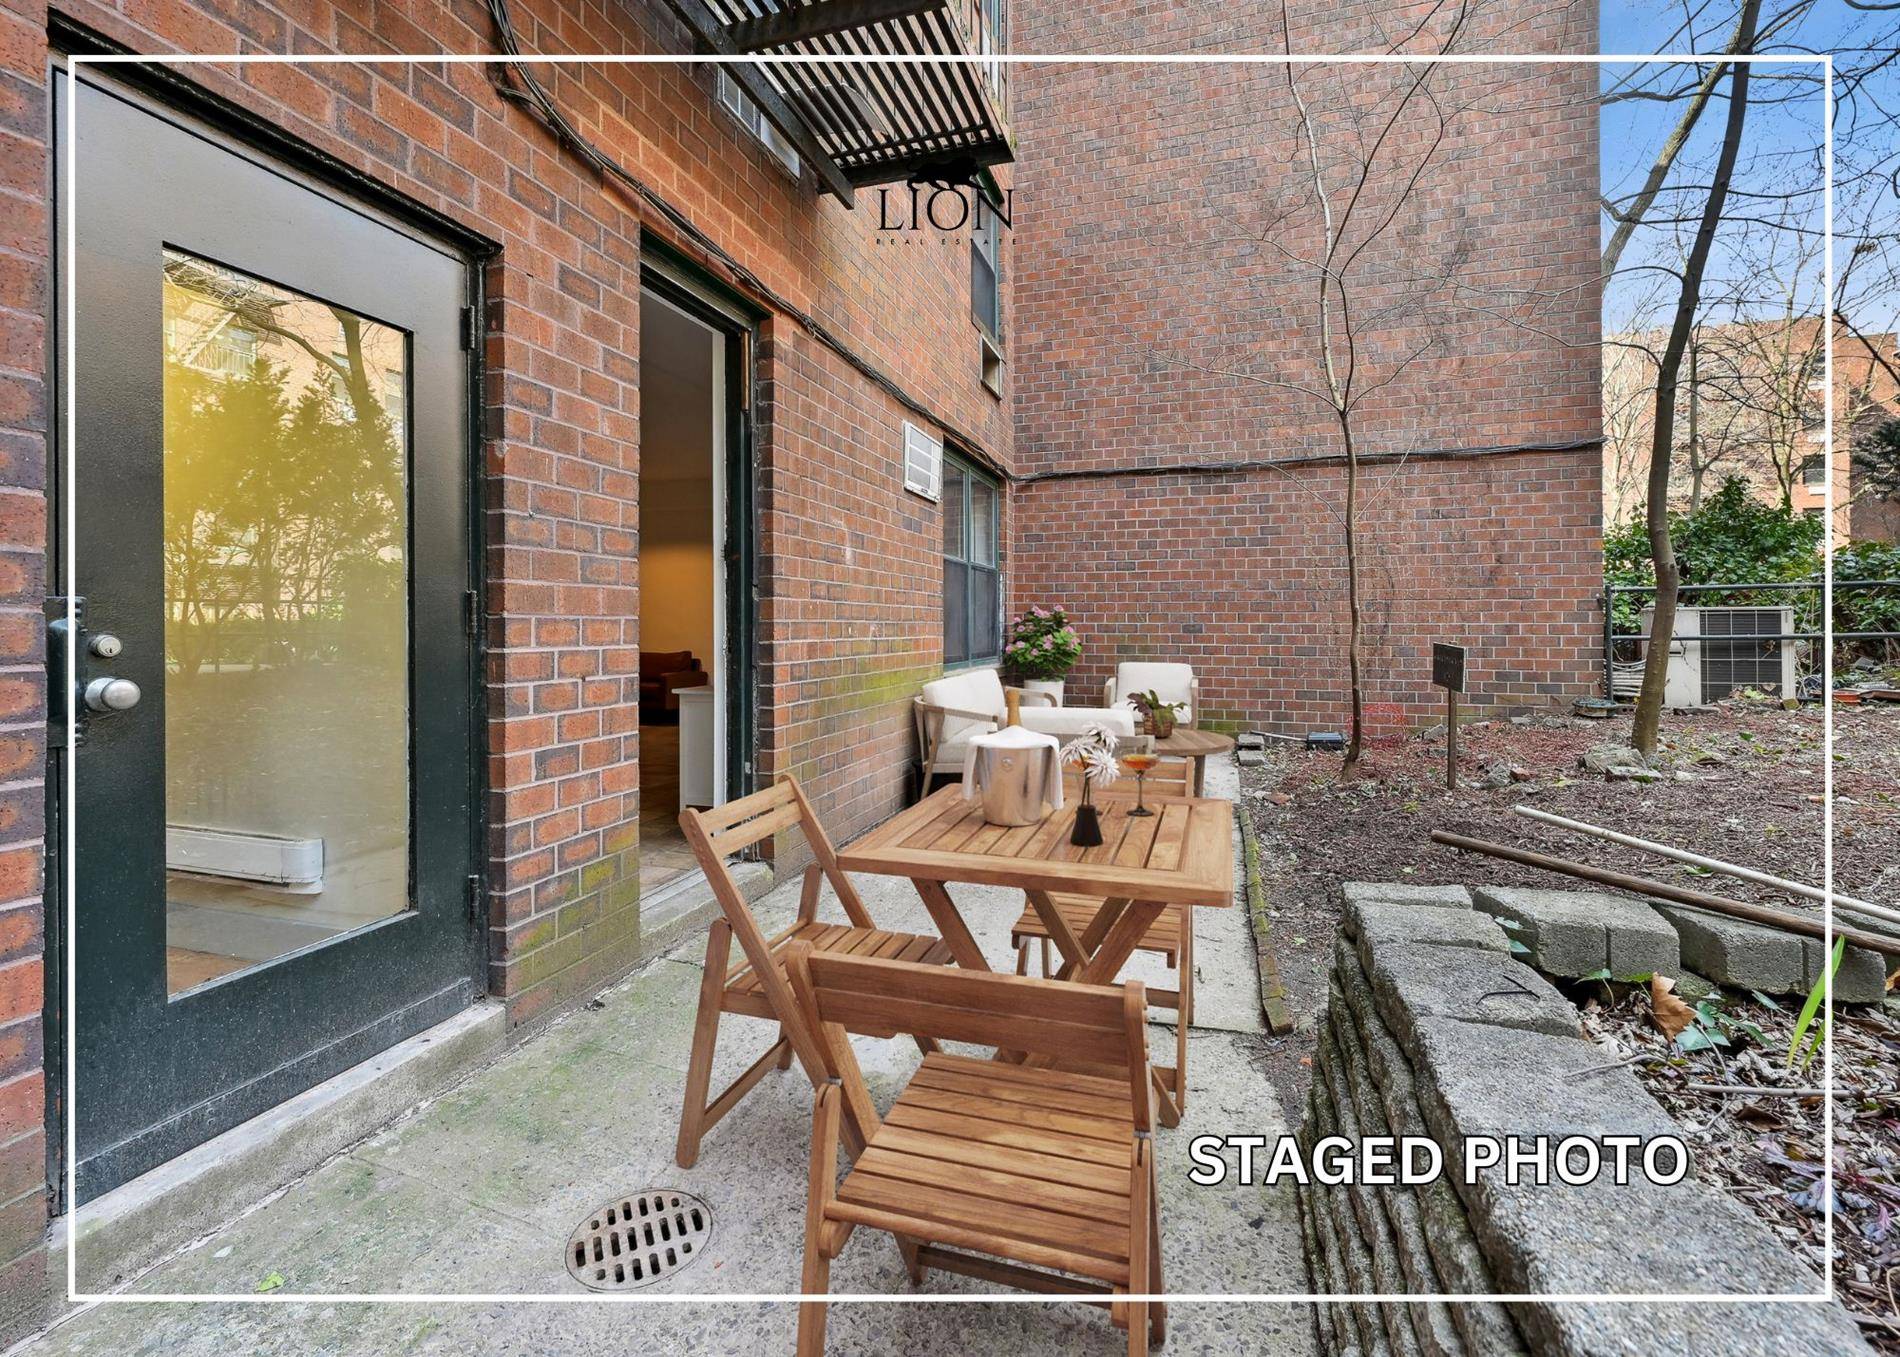 NEW TO THE MARKET 105 Morton St amp ; Washington, the heart of the West Village !